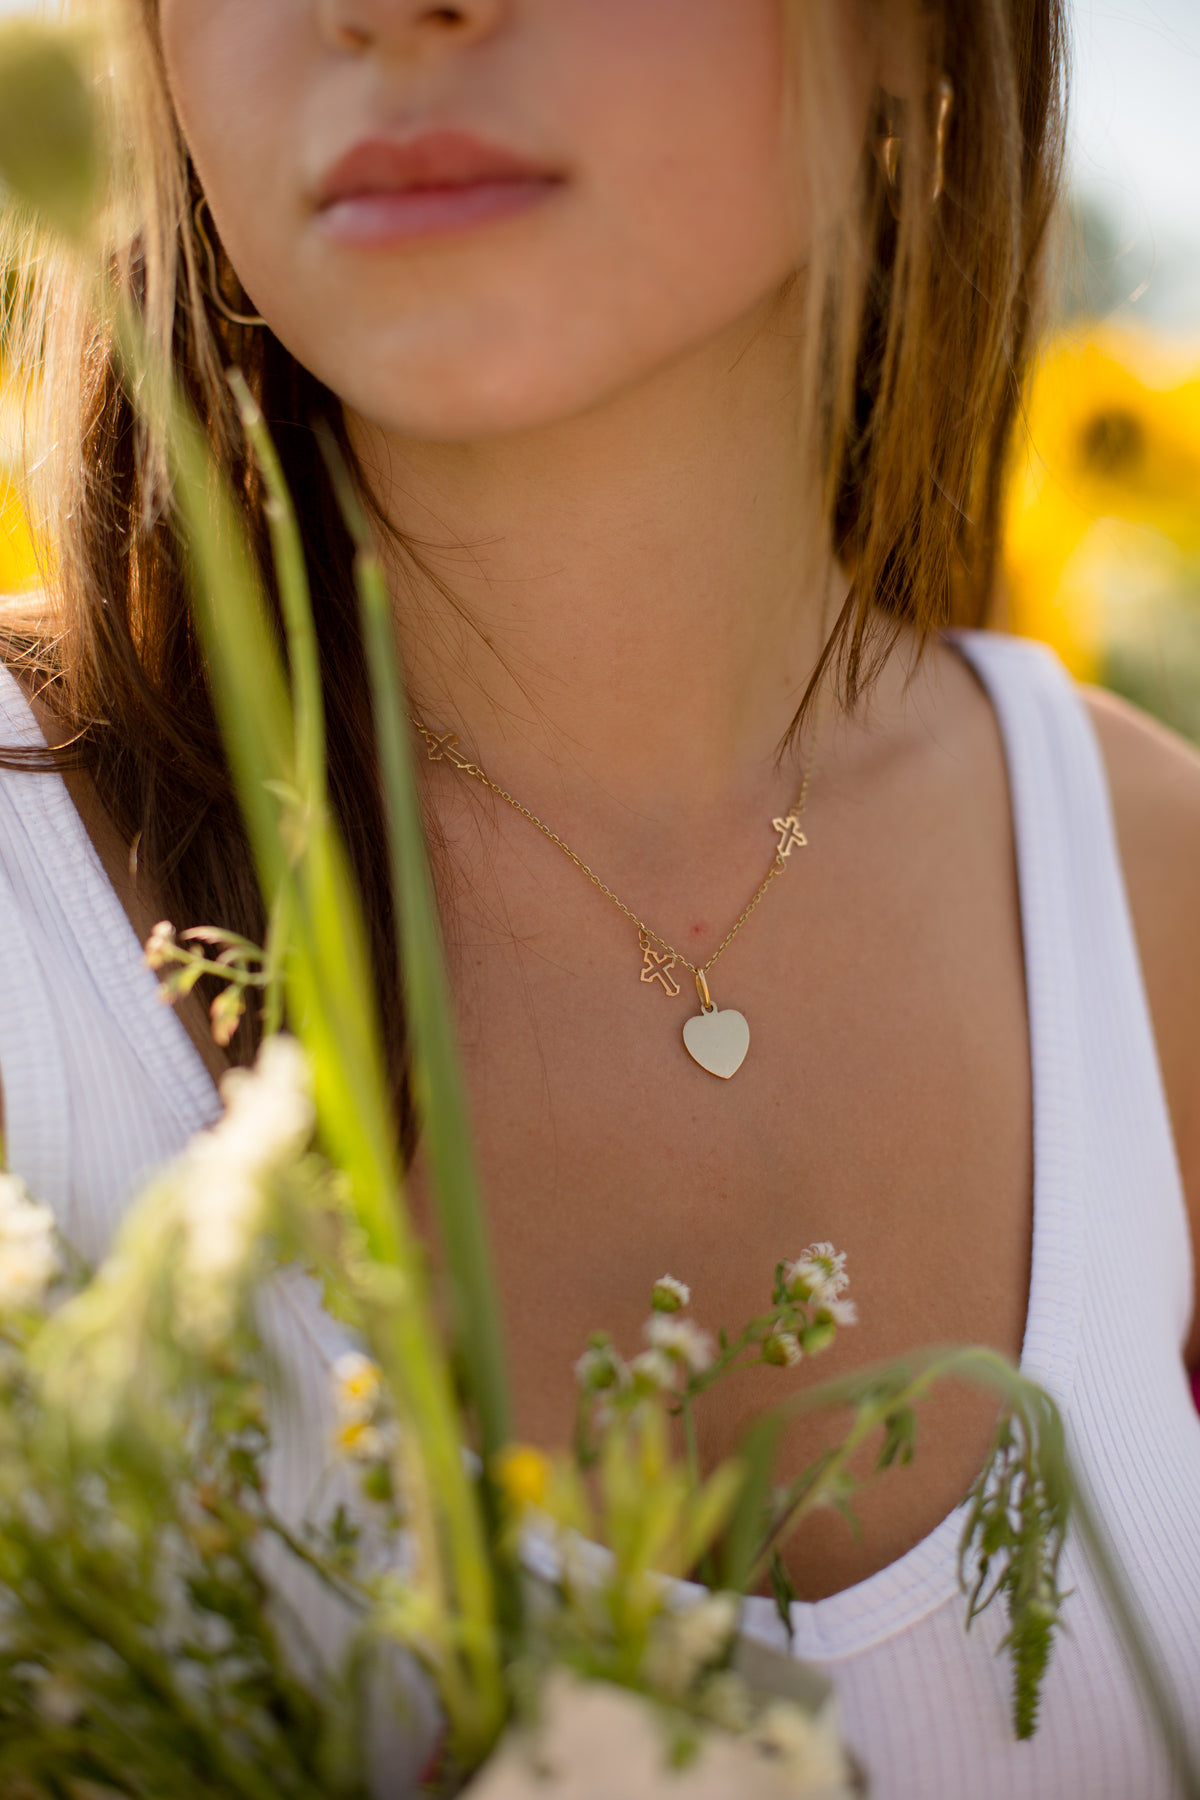 close up of a gold necklace on a person in a white shirt